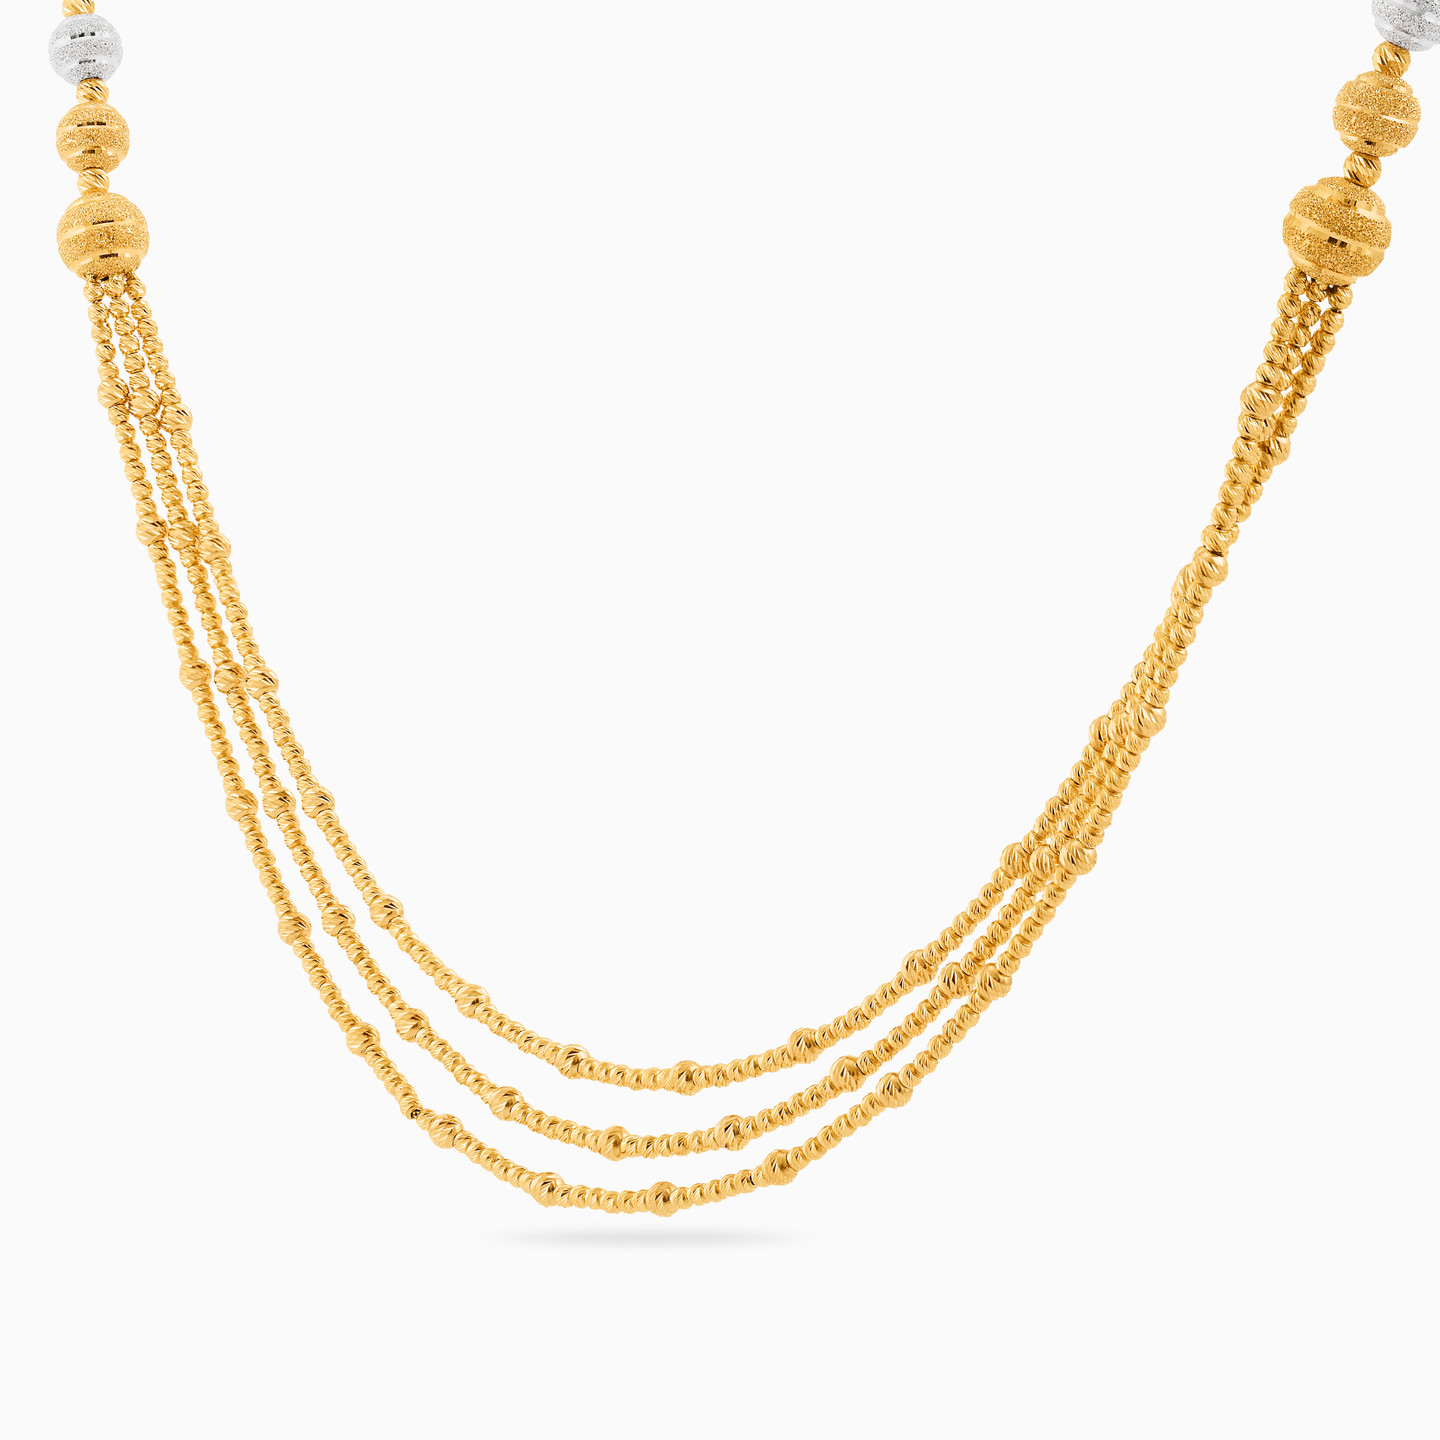 21K Gold Layered Necklace - 2